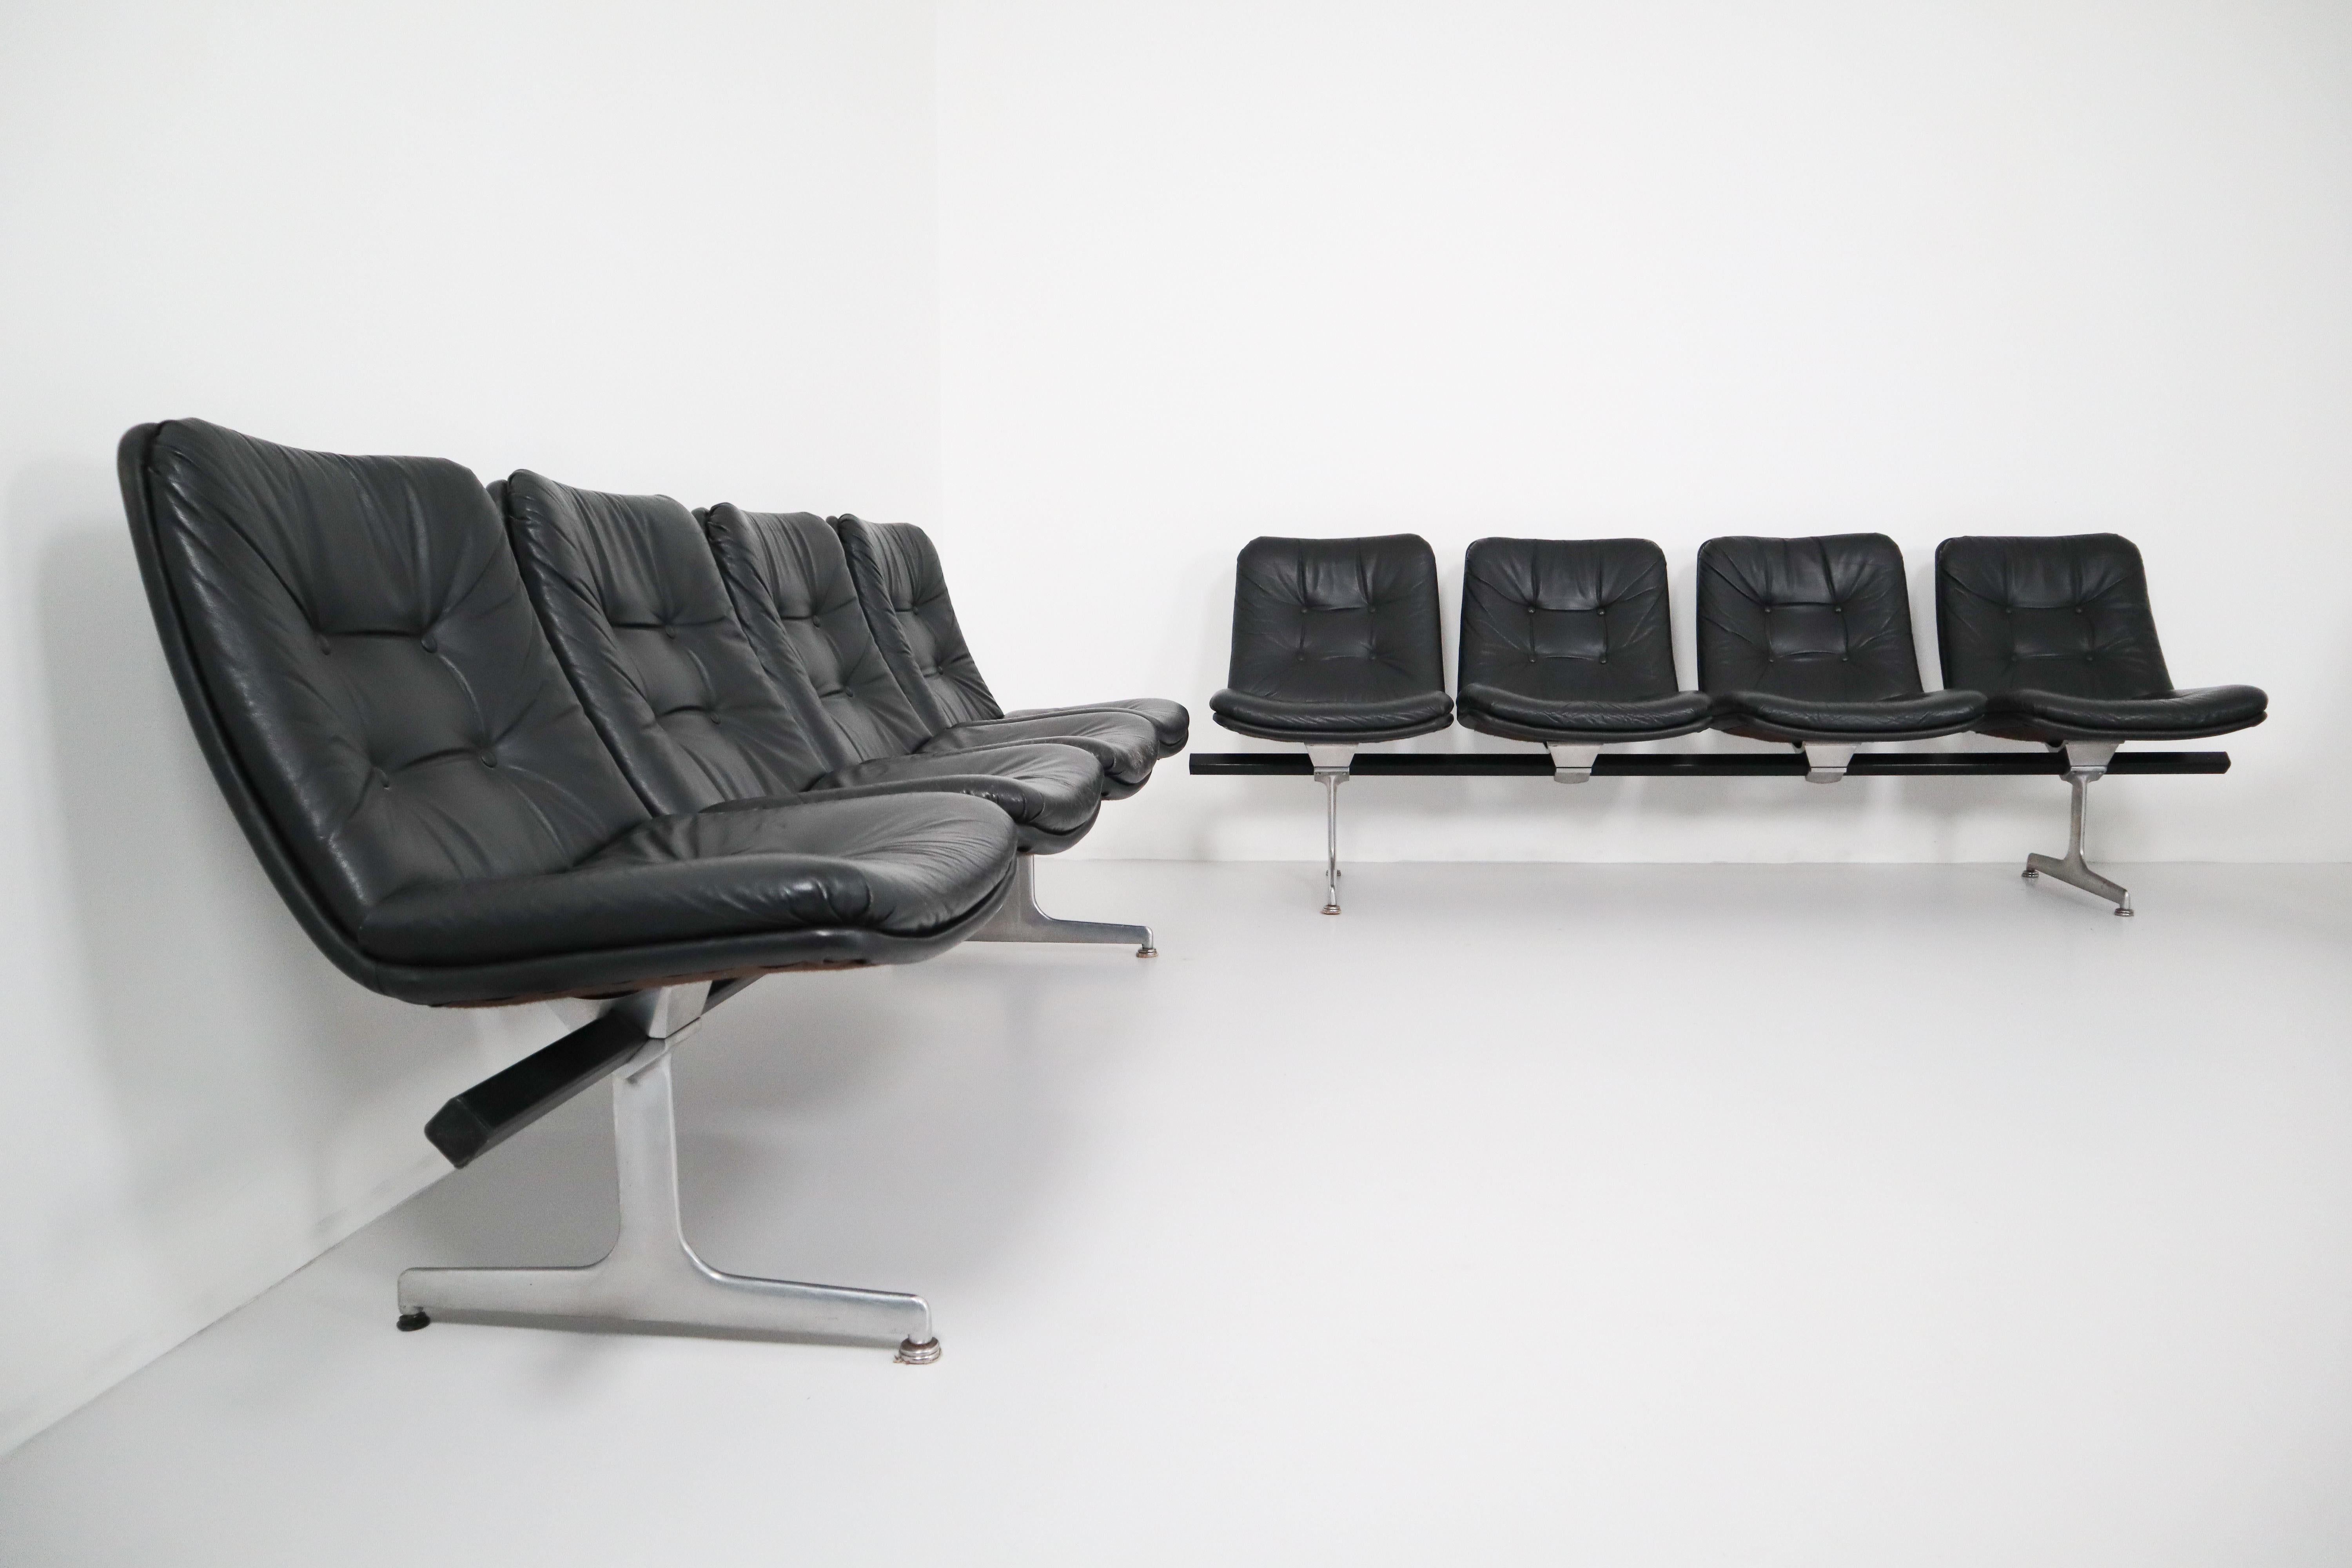 Timeless office or waiting area seating, designed in 1960s by Geoffrey D. Harcourt for Artifort. Modular multiple seating system, with cast aluminium leg frames and base plates which could be mounted on a steel beam set diagonally, are very rare